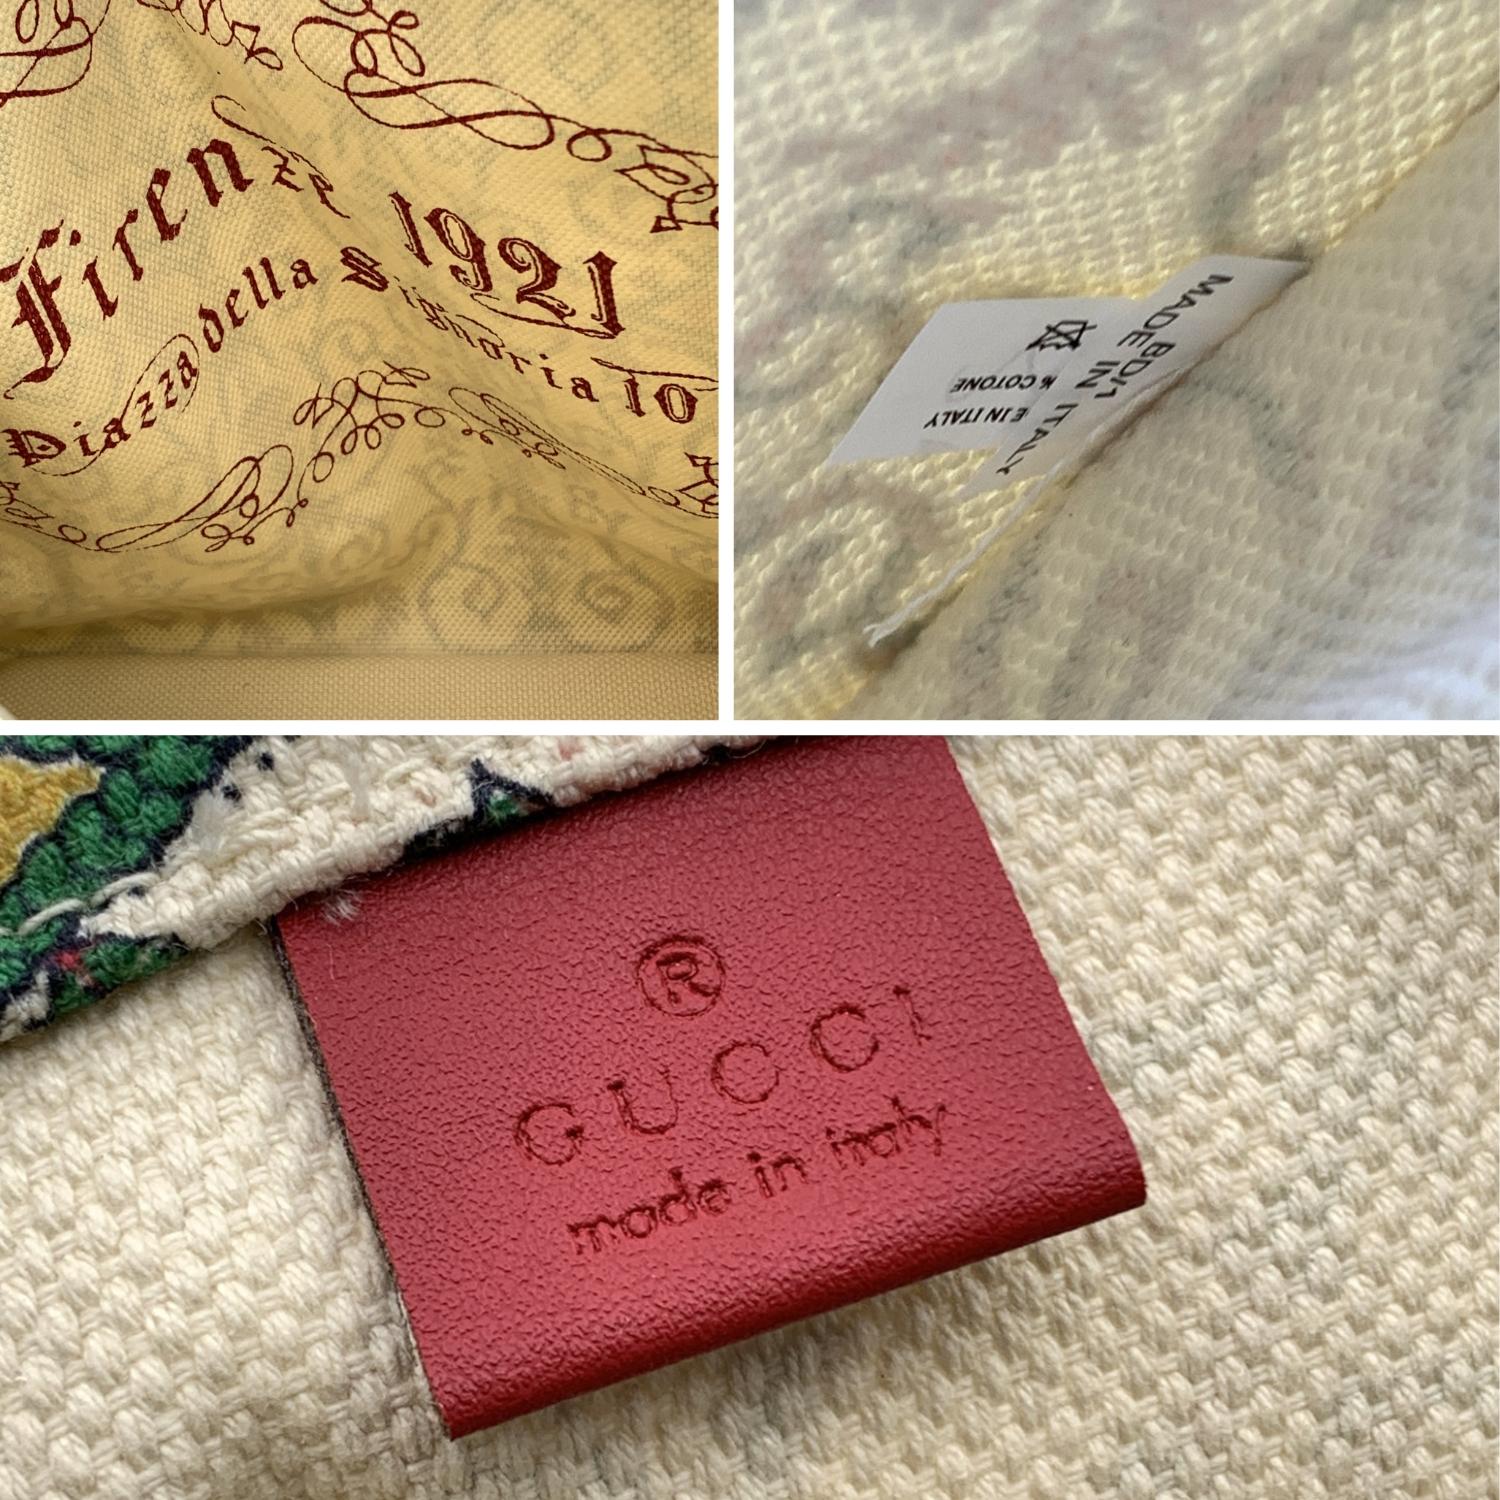 Gucci Garden Firenze 1921 Printed Canvas Tote Shopping Bag In Excellent Condition In Rome, Rome